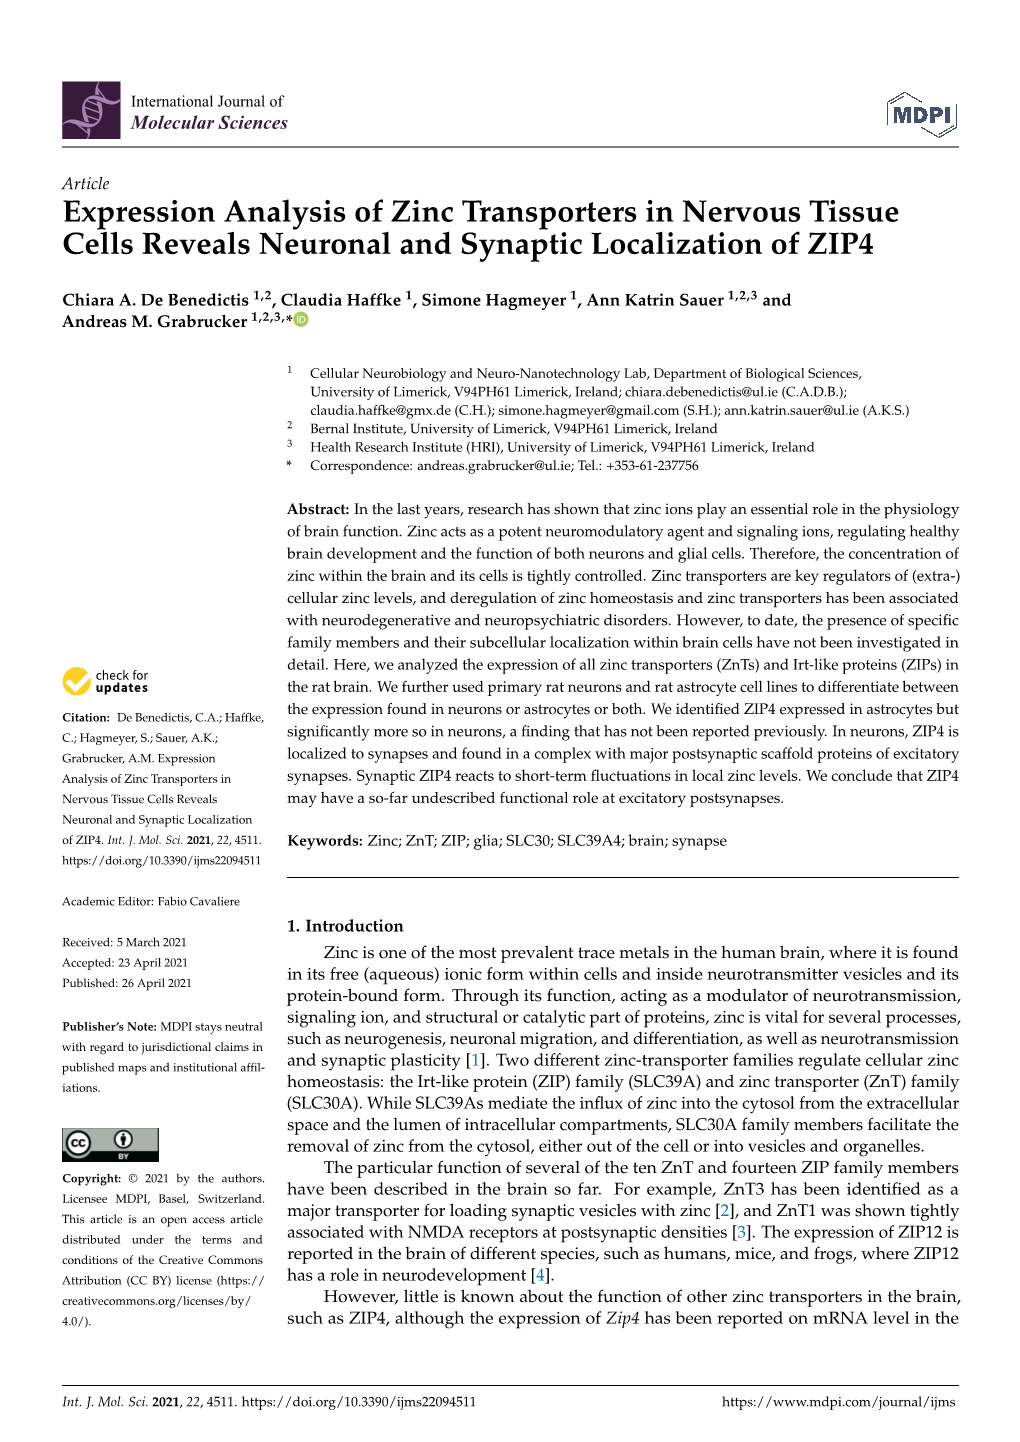 Expression Analysis of Zinc Transporters in Nervous Tissue Cells Reveals Neuronal and Synaptic Localization of ZIP4